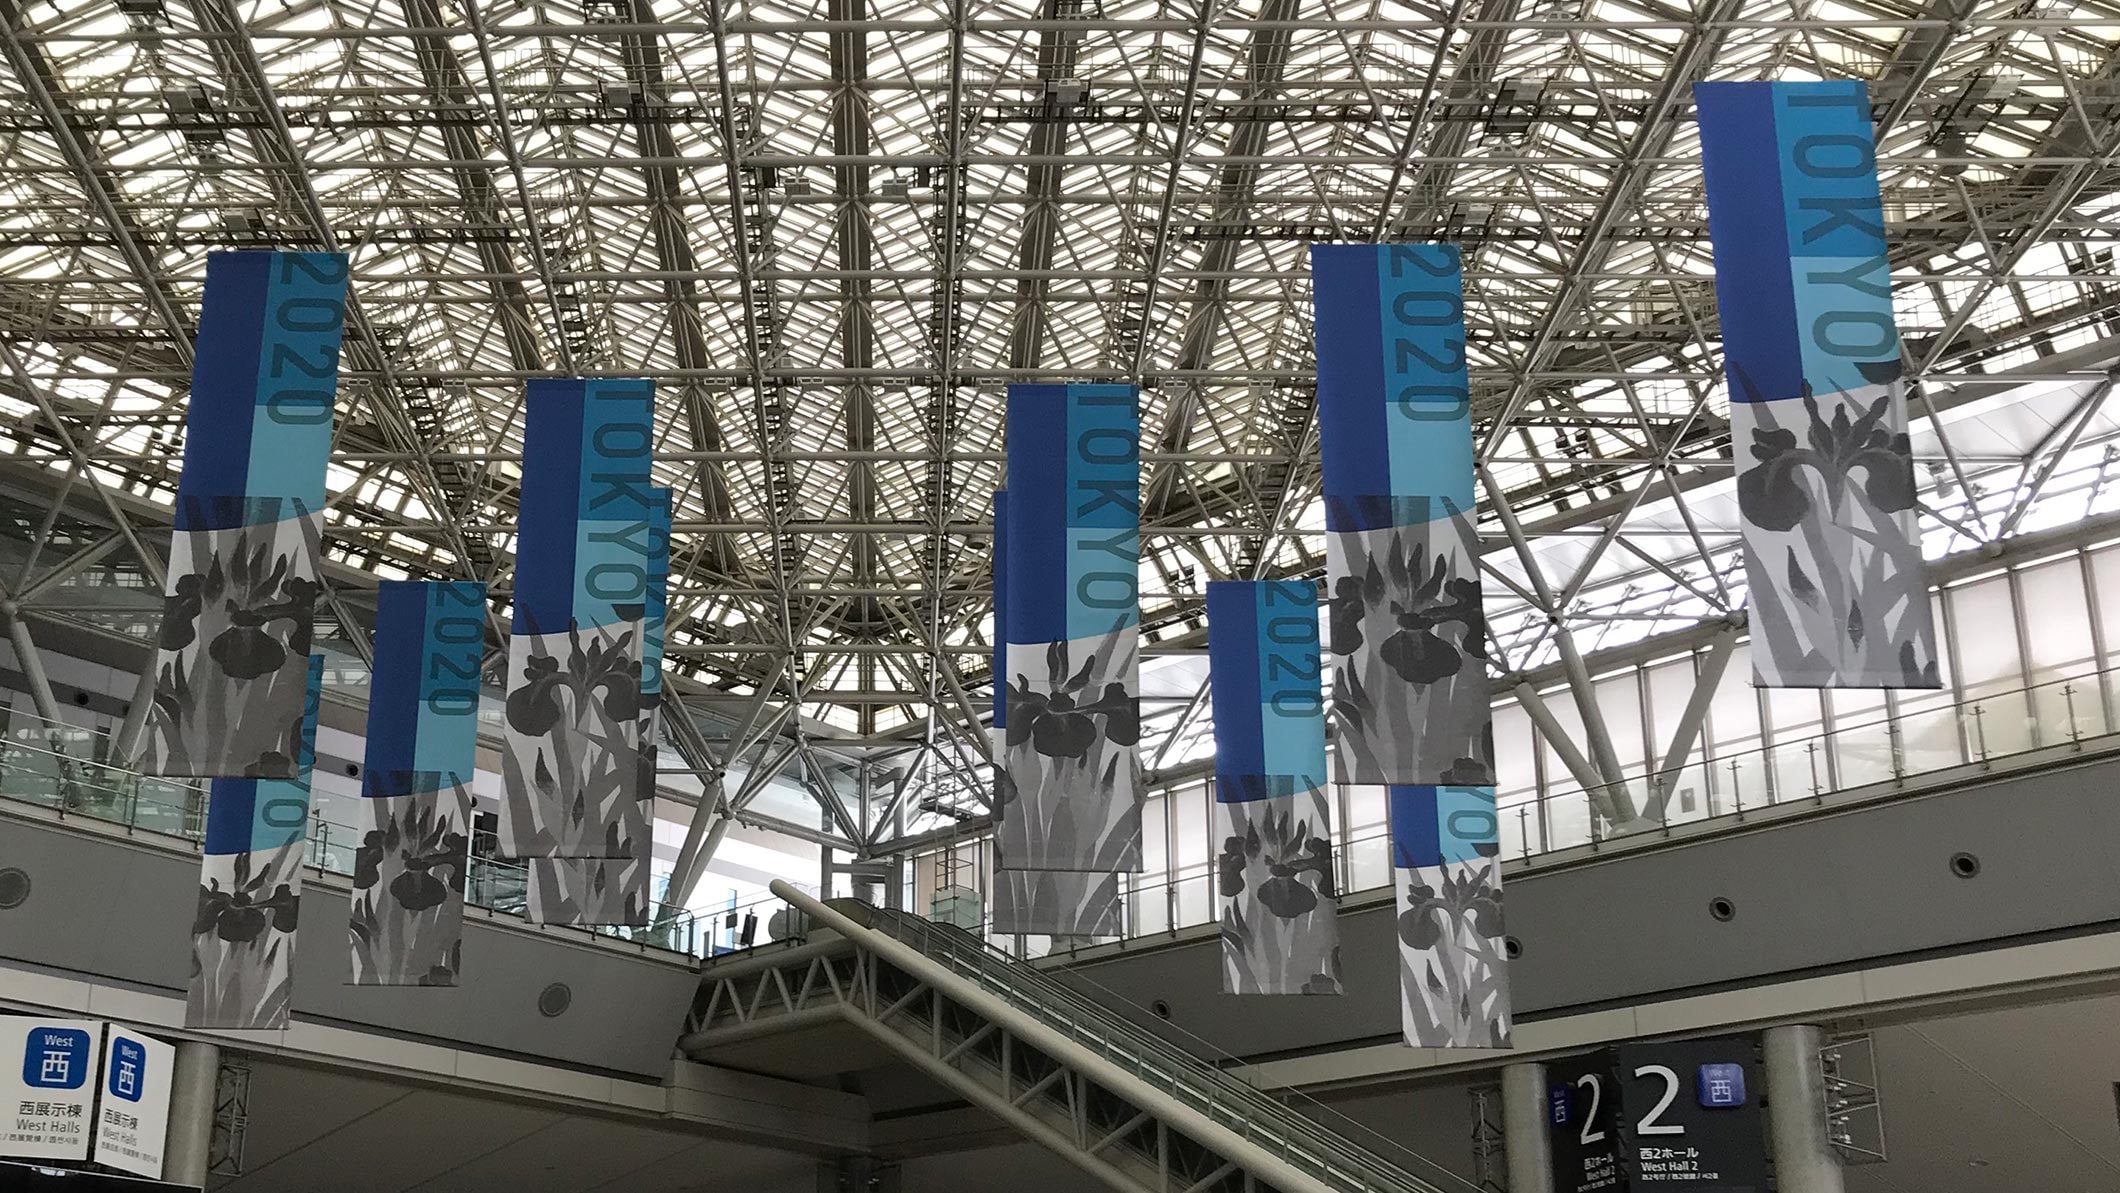 Tokyo 2020 banners